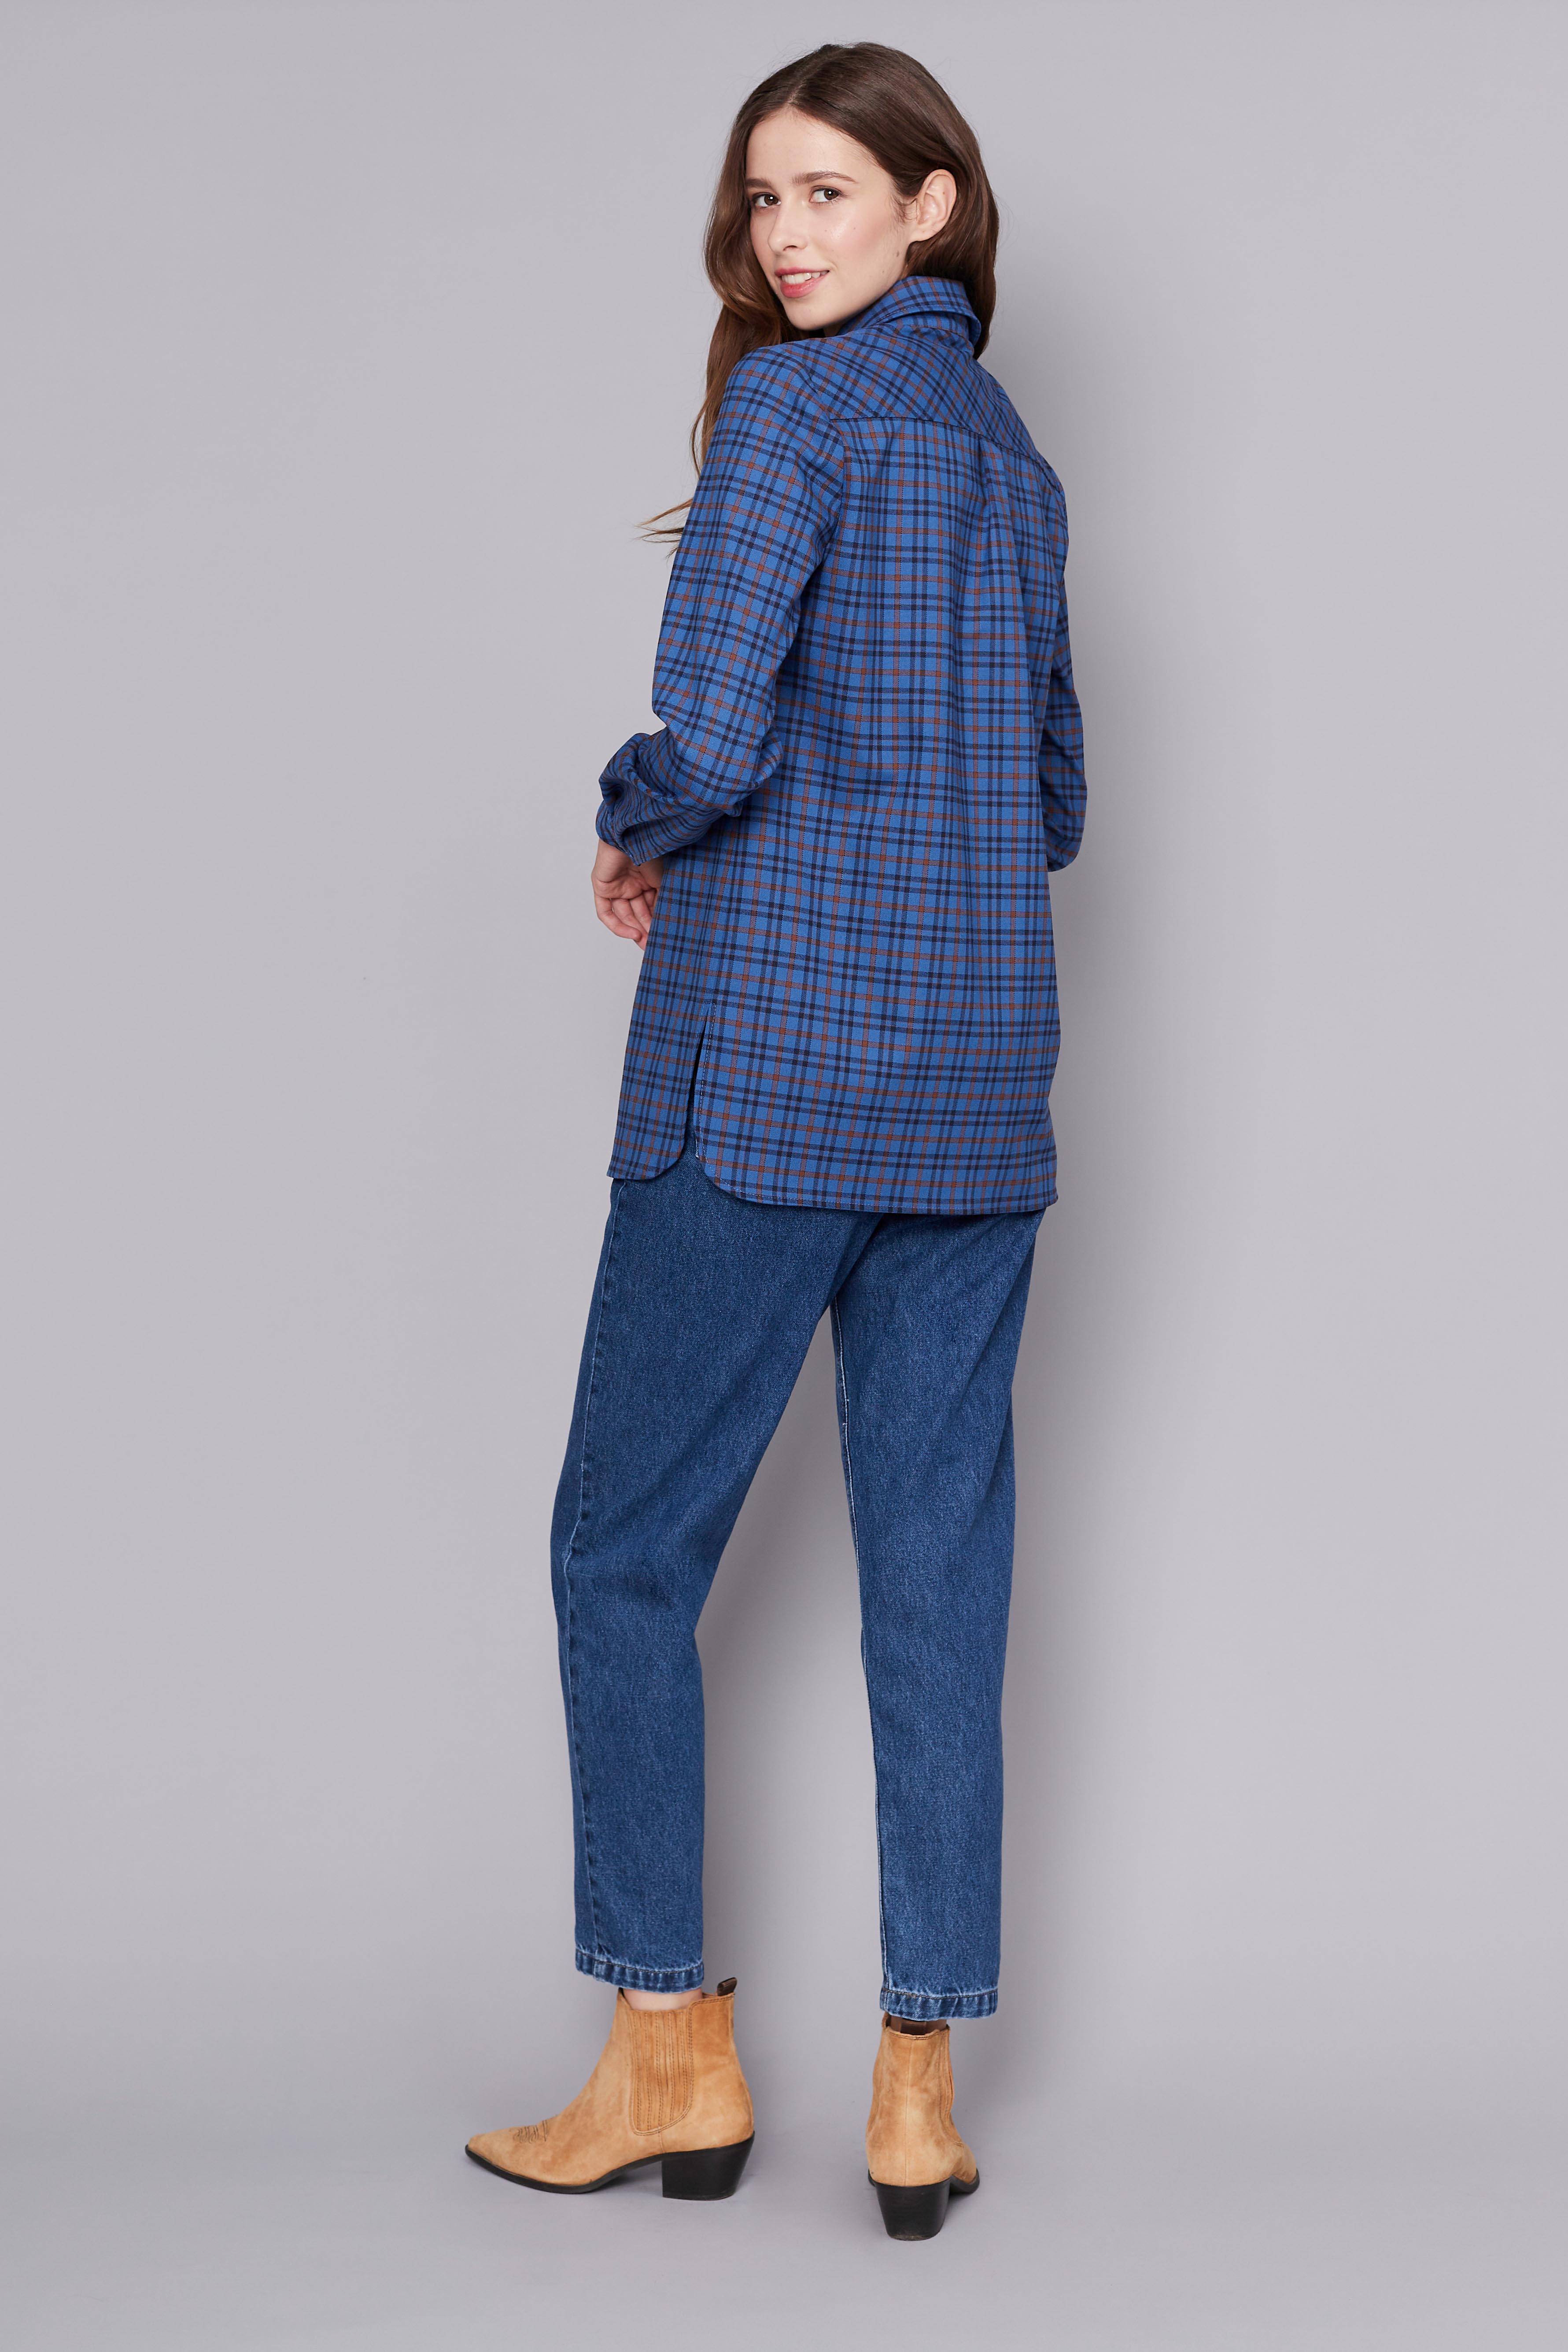 Blue checkered shirt with pockets, photo 1